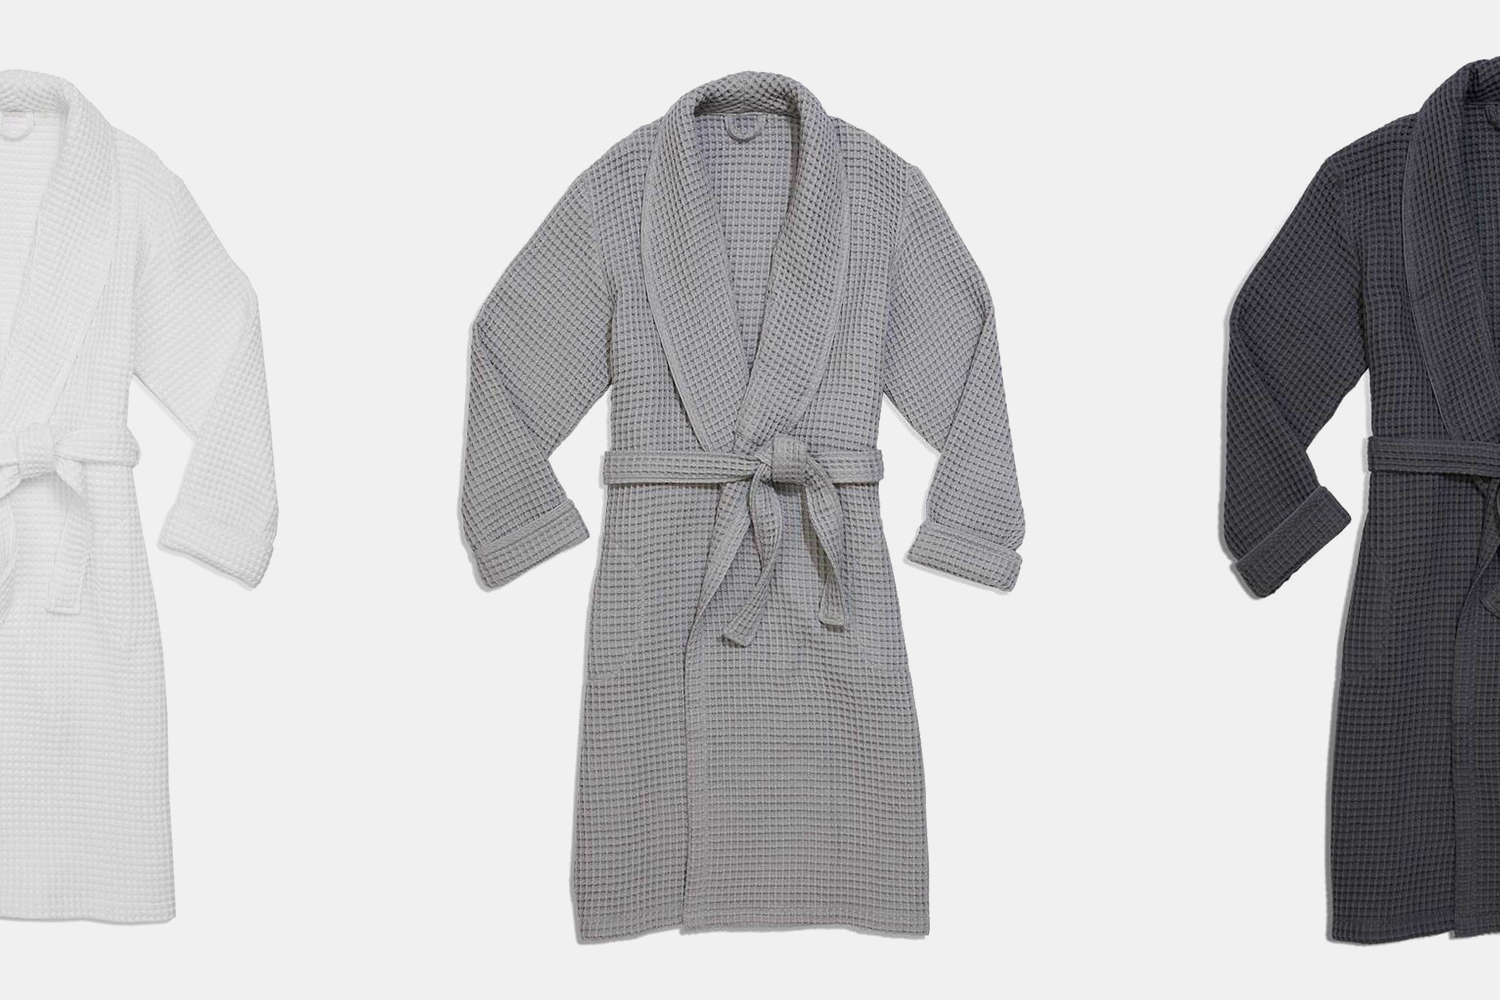 Brooklinen Now Makes Waffle Towels (and Robes)